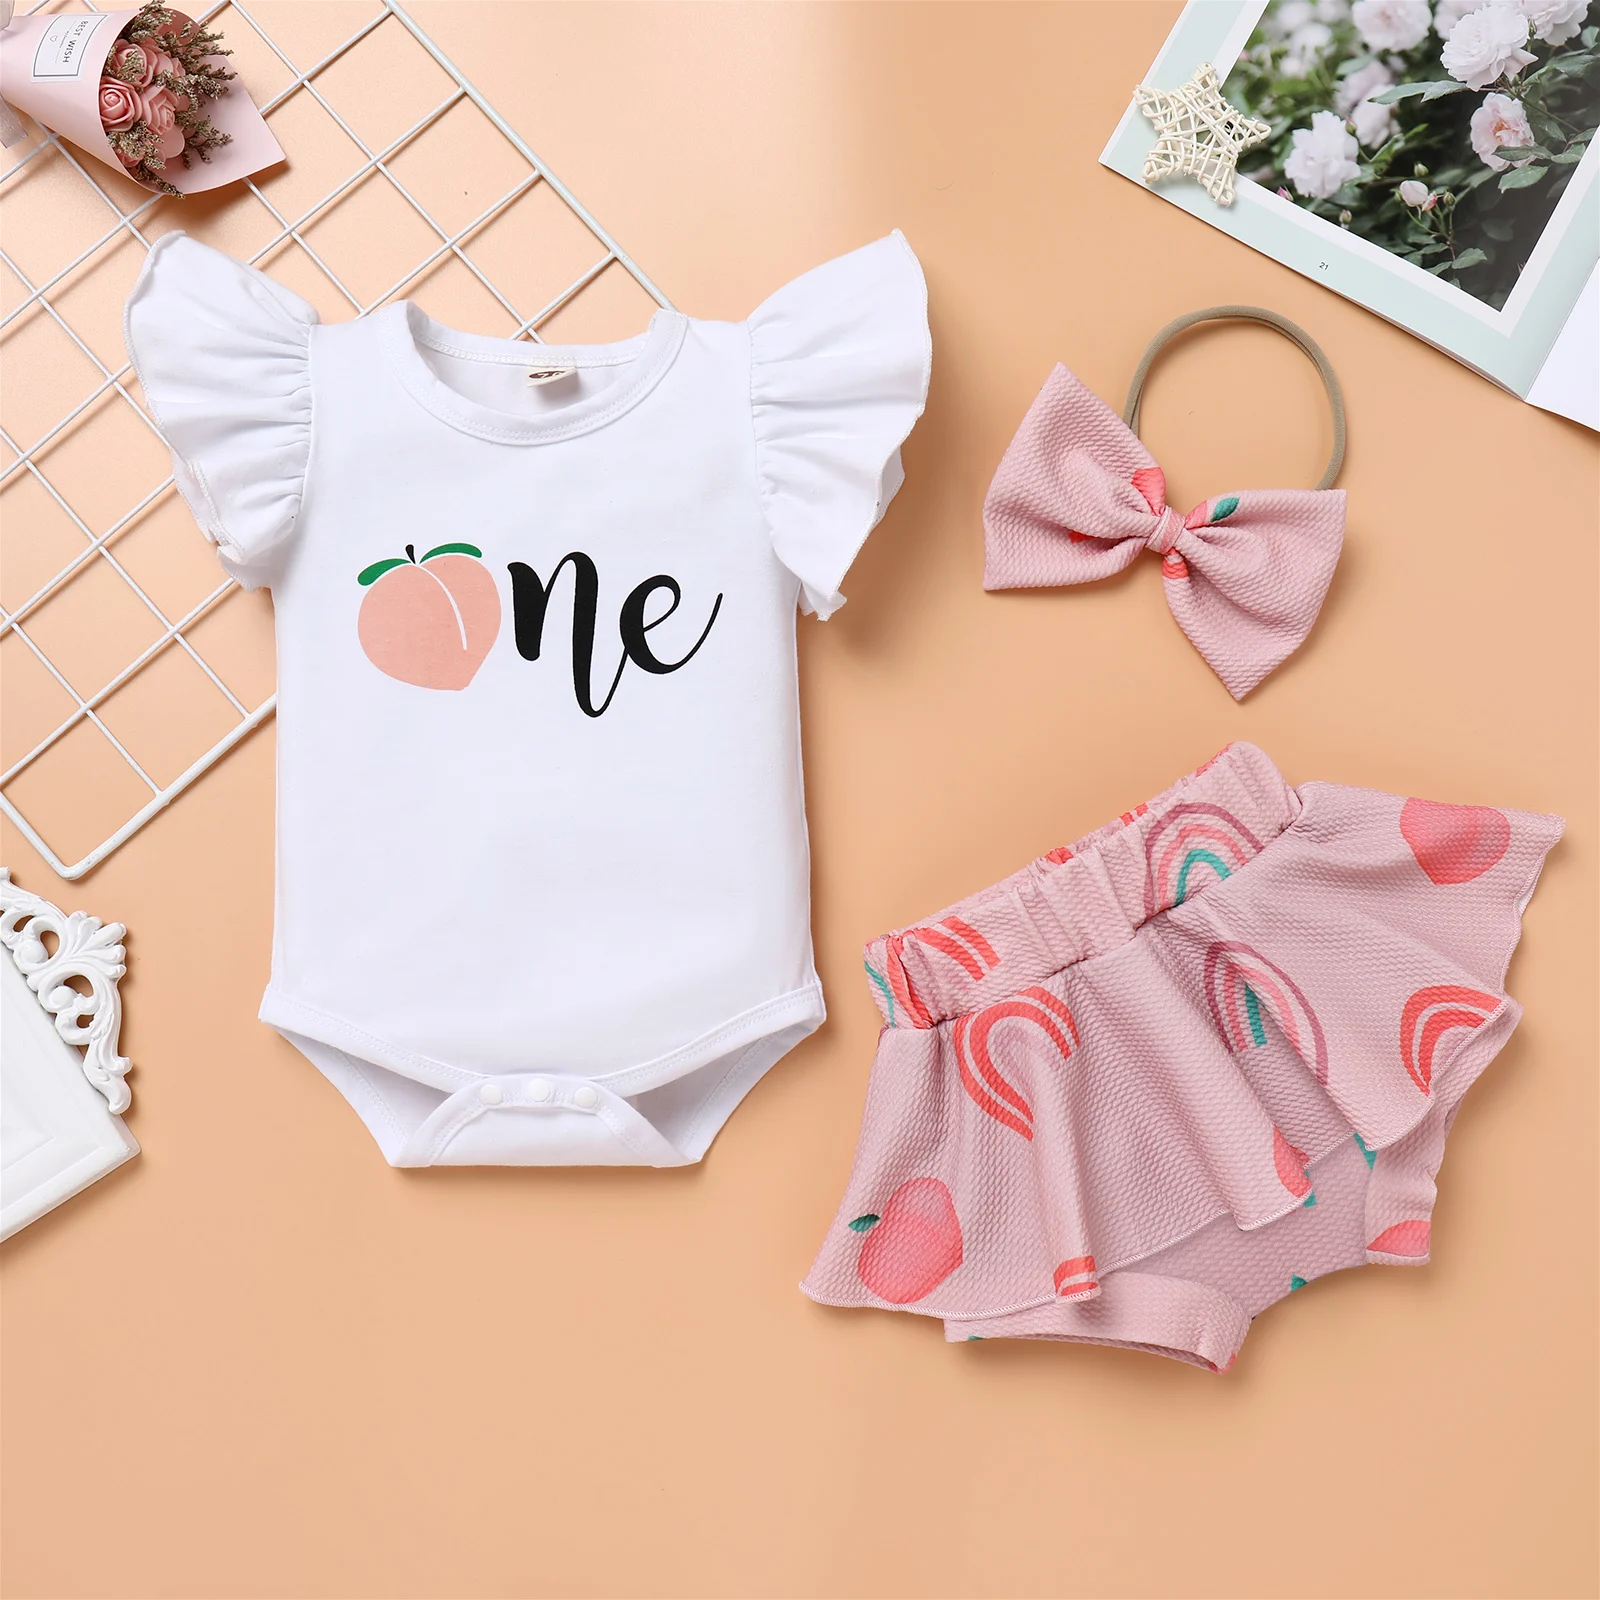 6-18M Baby Birthday Dress Flying Sleeve Letter Printing Bloomers And Headband 3pcs Outfit Cake Smash And Photo Shoot Dress